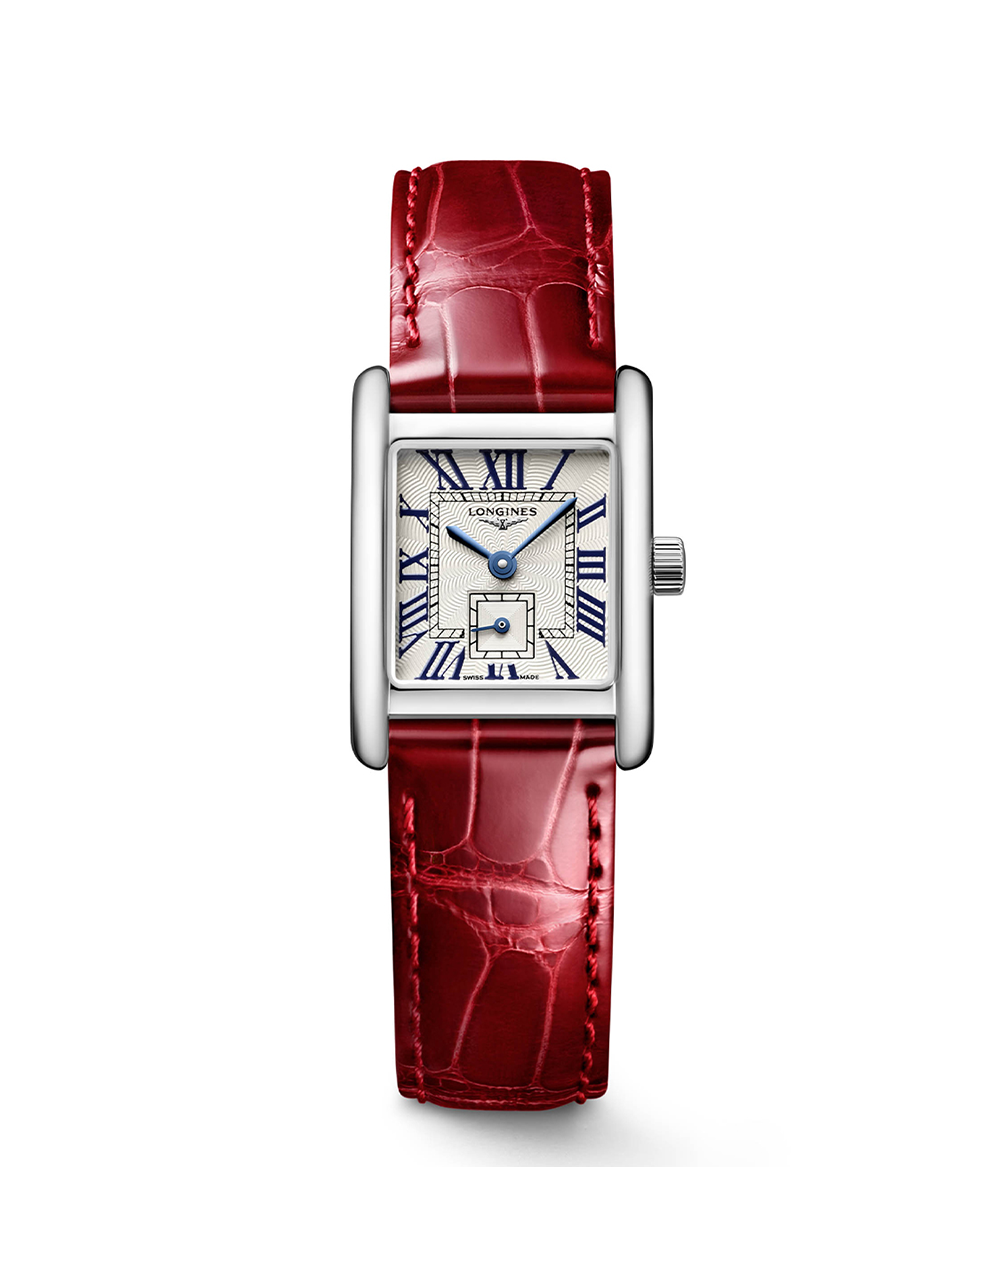 Longines Mini Dolcevita 29mm Watch with Red Alligator Strap